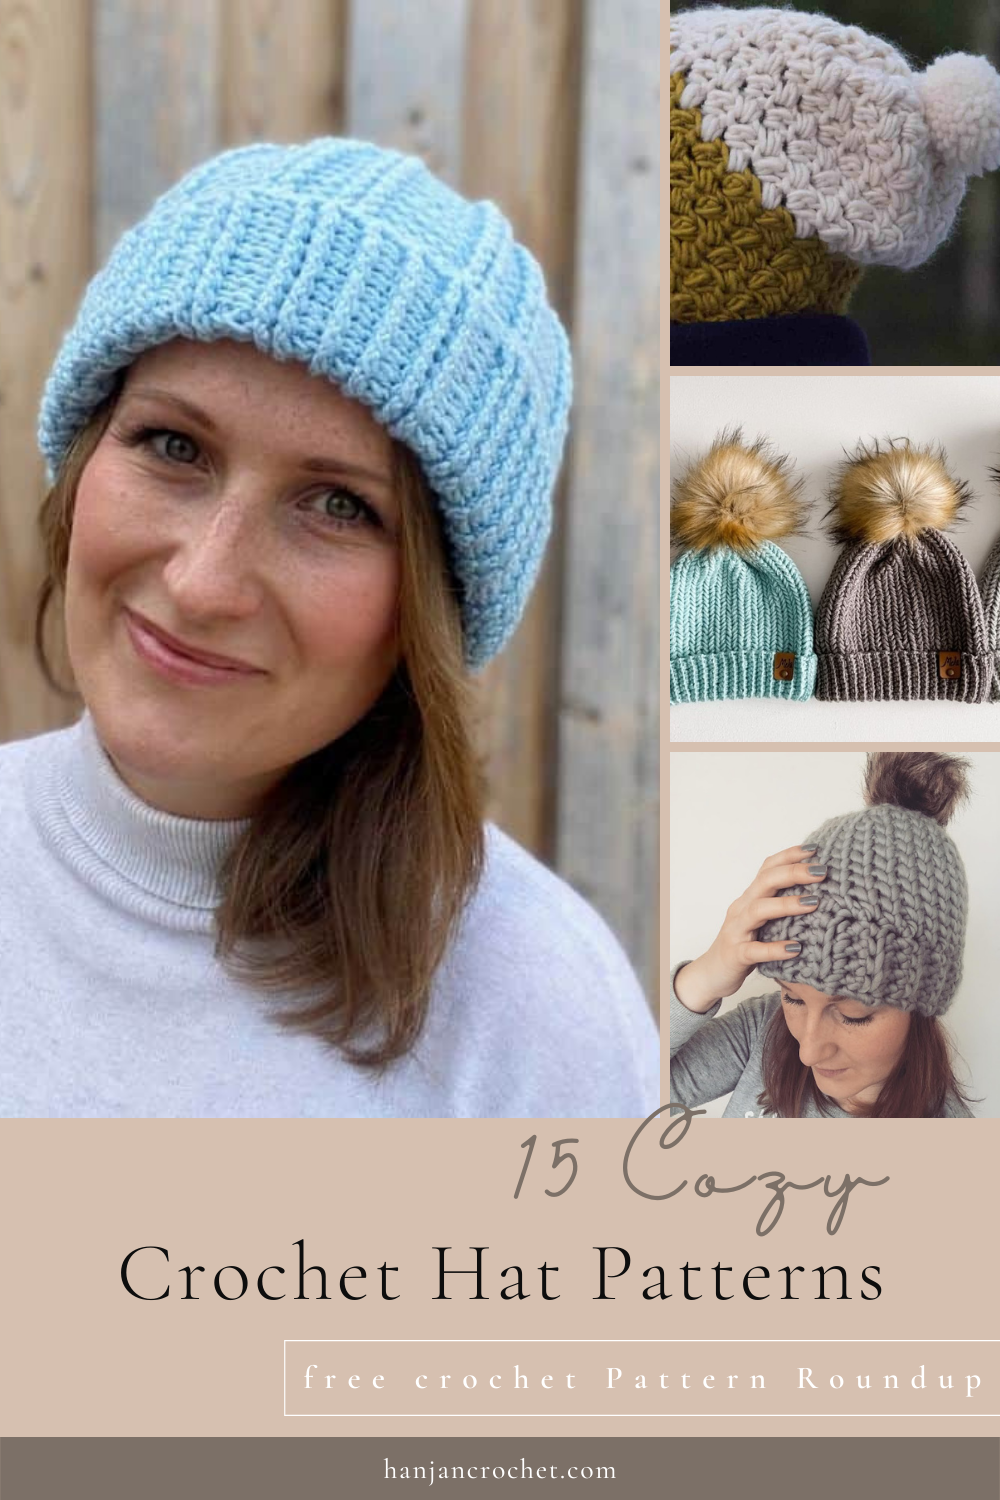 image showing how to crochet a hat with 4 different crochet hat patterns that are cozy and quick